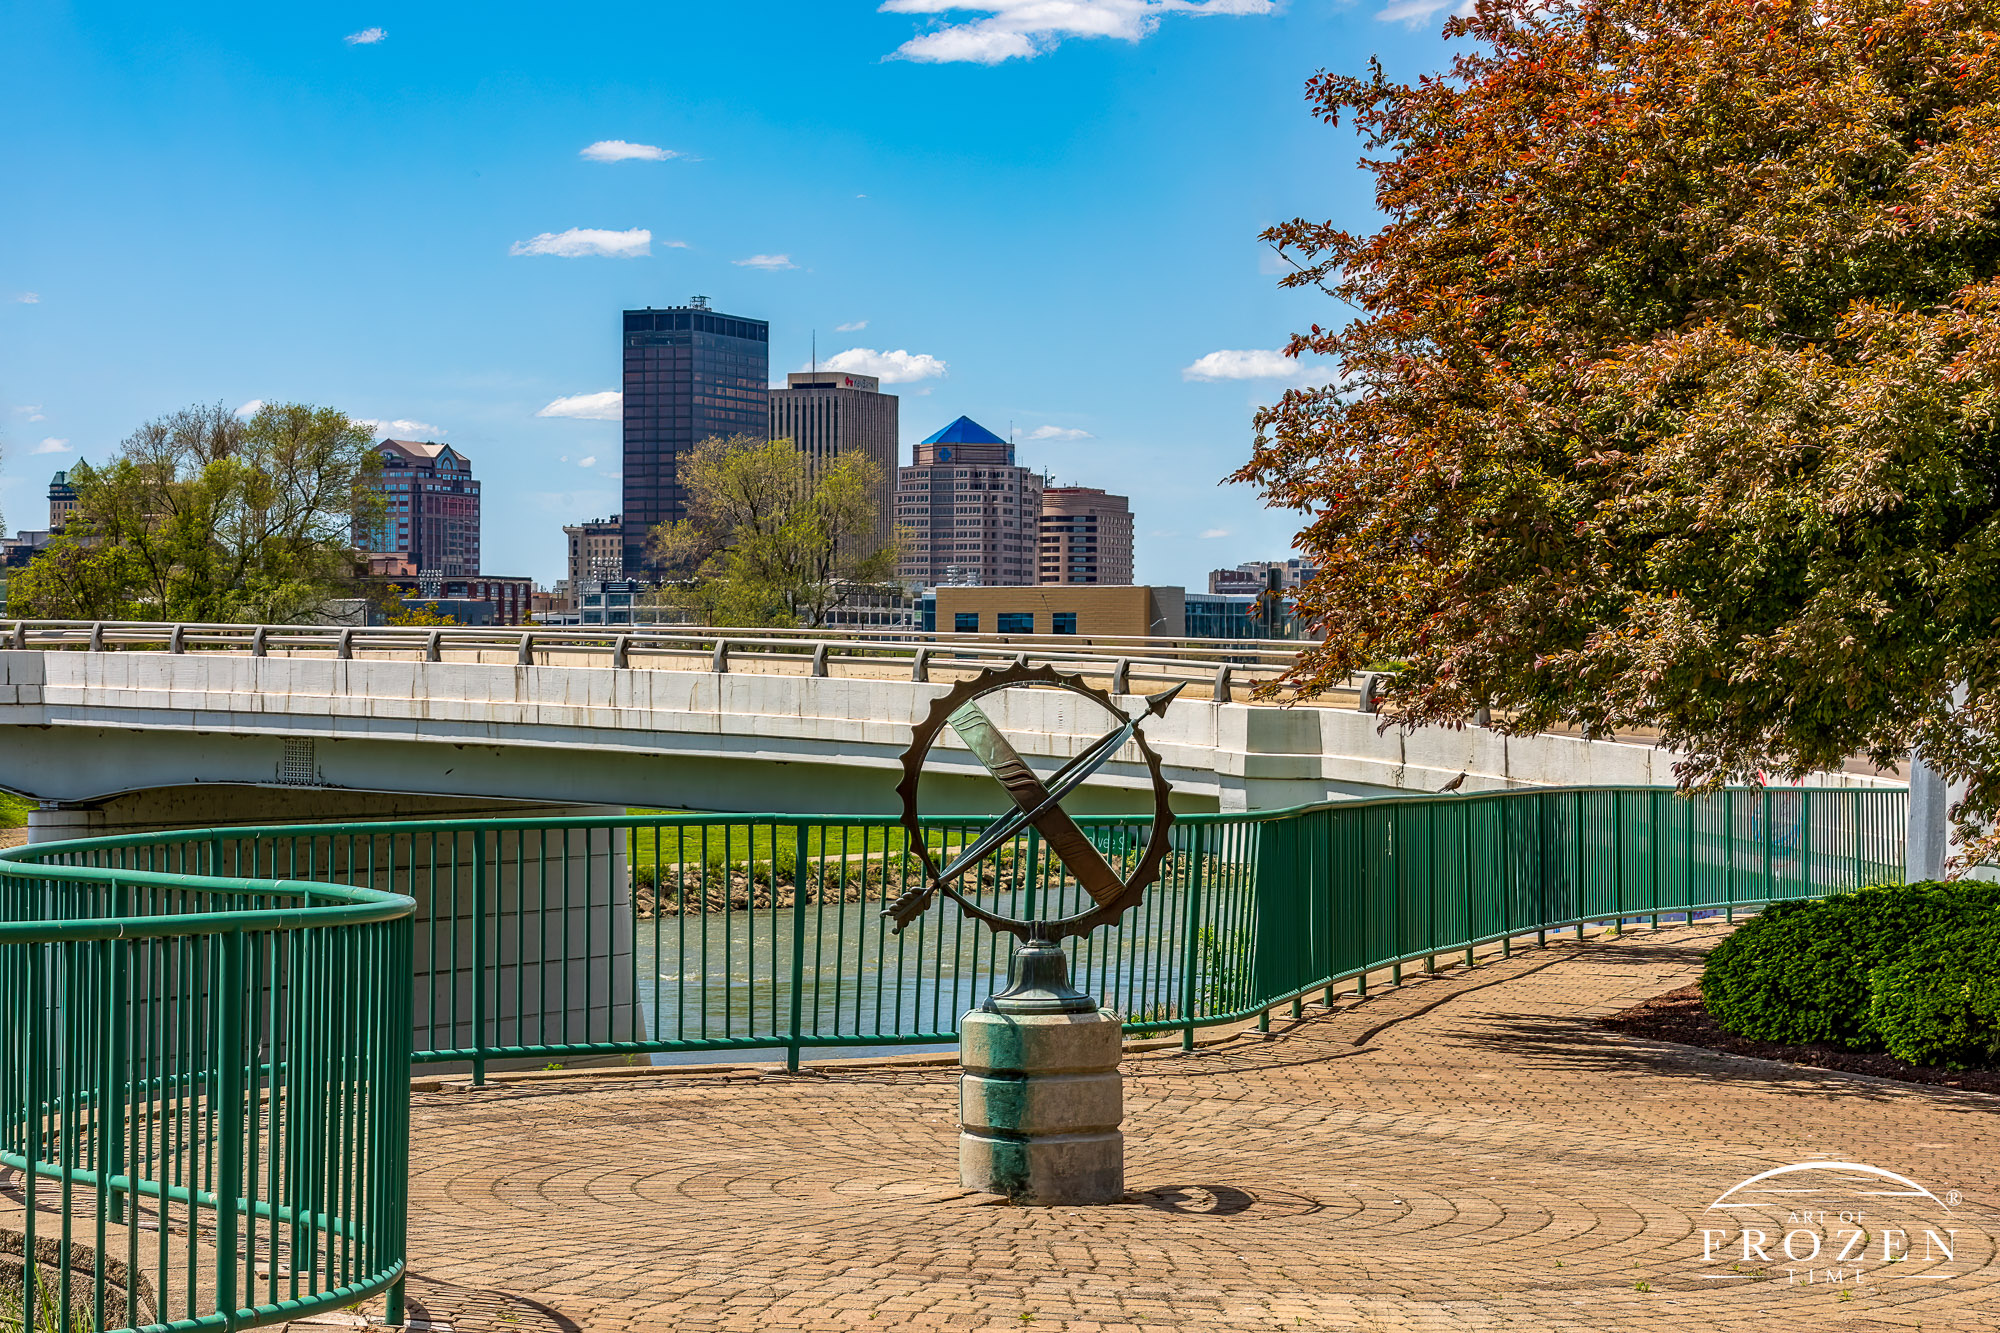 A pleasant spring day from the Joseph R Kanak Park at Valley and Keowee streets where a bronze armillary stands on a pedestal in front of the Dayton Skyline